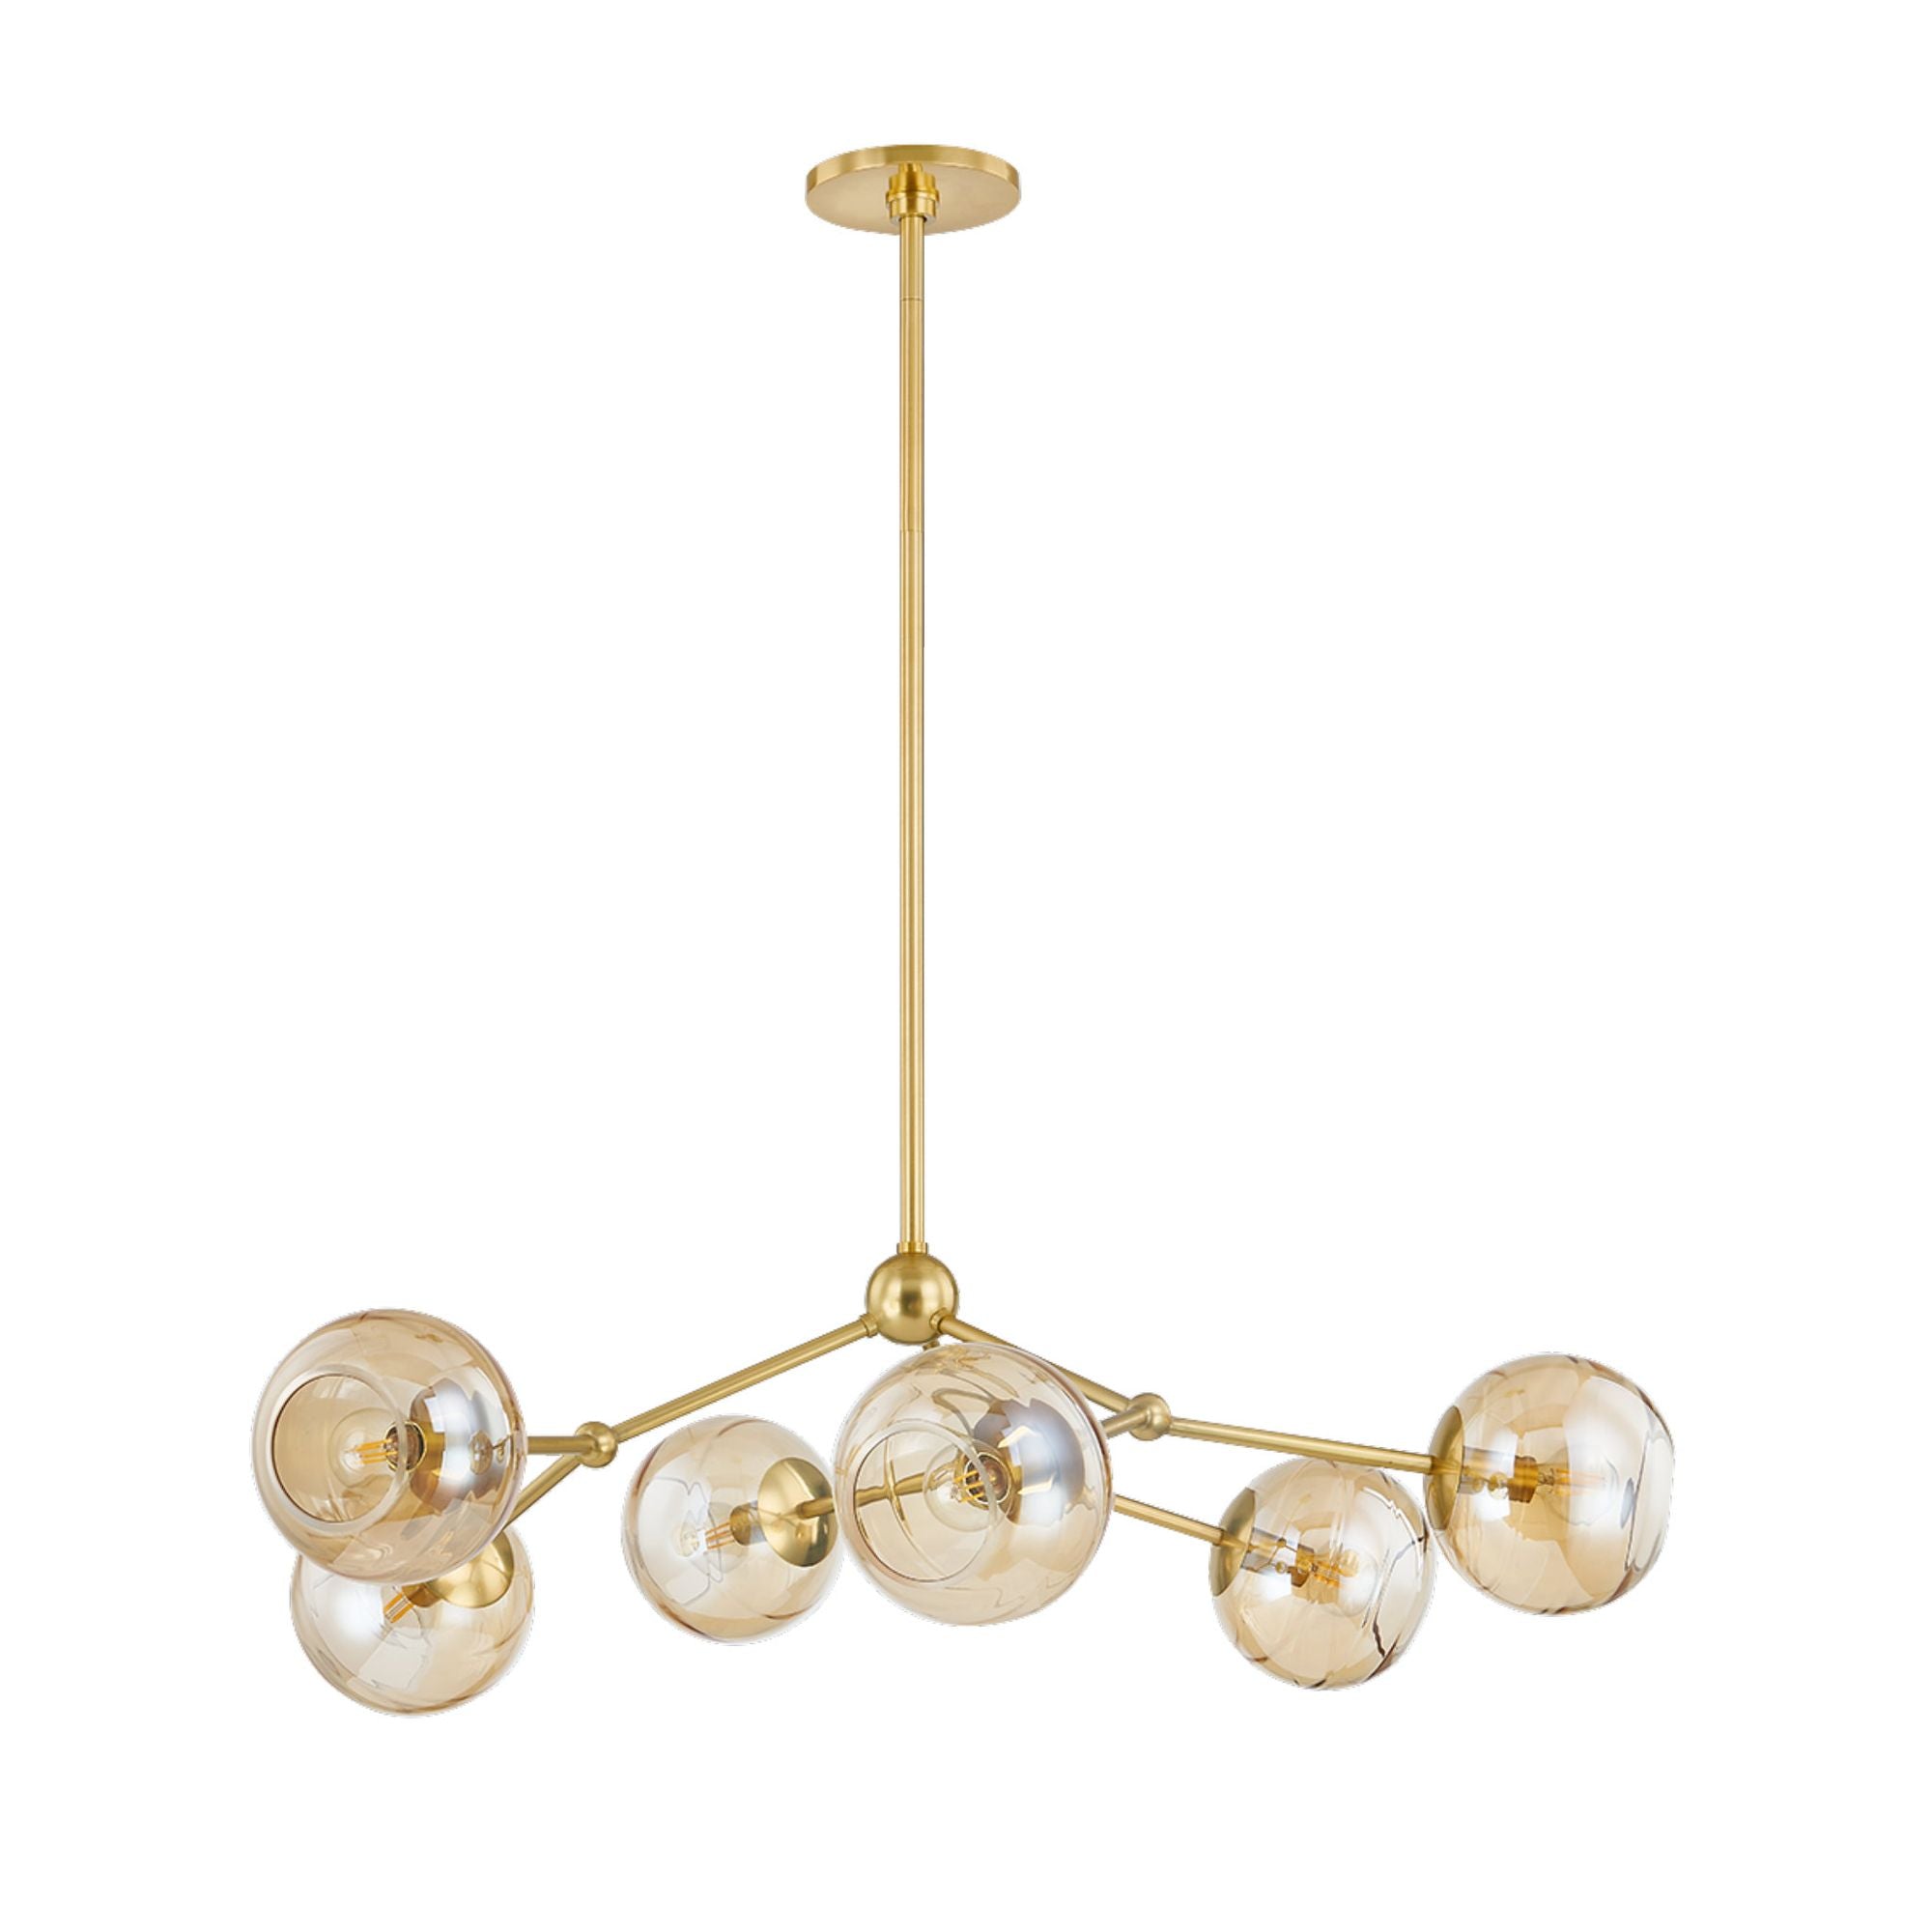 Trixie 6-Light Chandelier in Aged Brass by August Knox